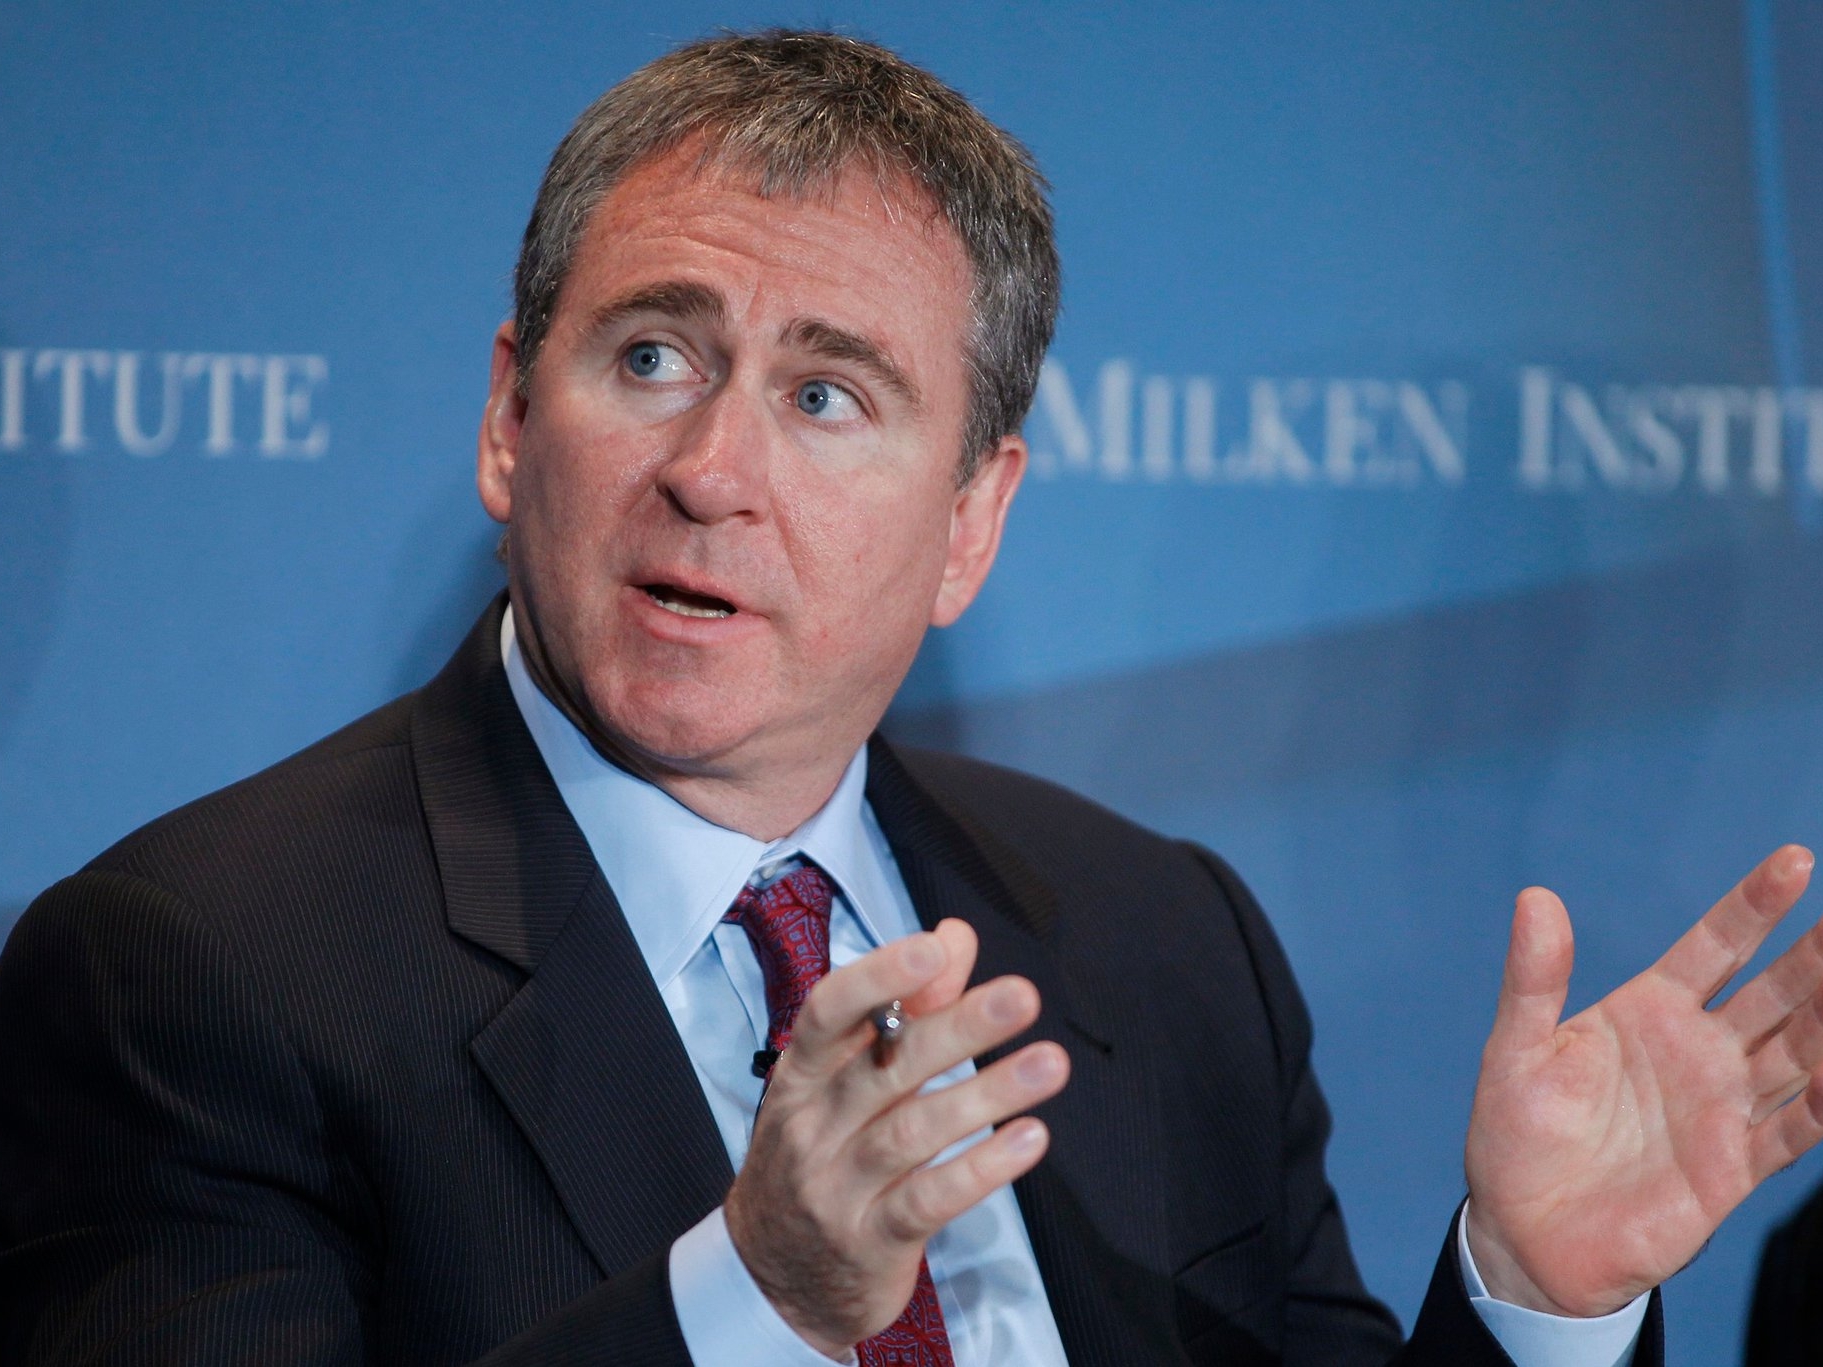 Citadel founder Ken Griffin, who backed Nikki Haley in the primary, remains undecided on his choice for presidential endorsement. 
Image Source: The New York Times 